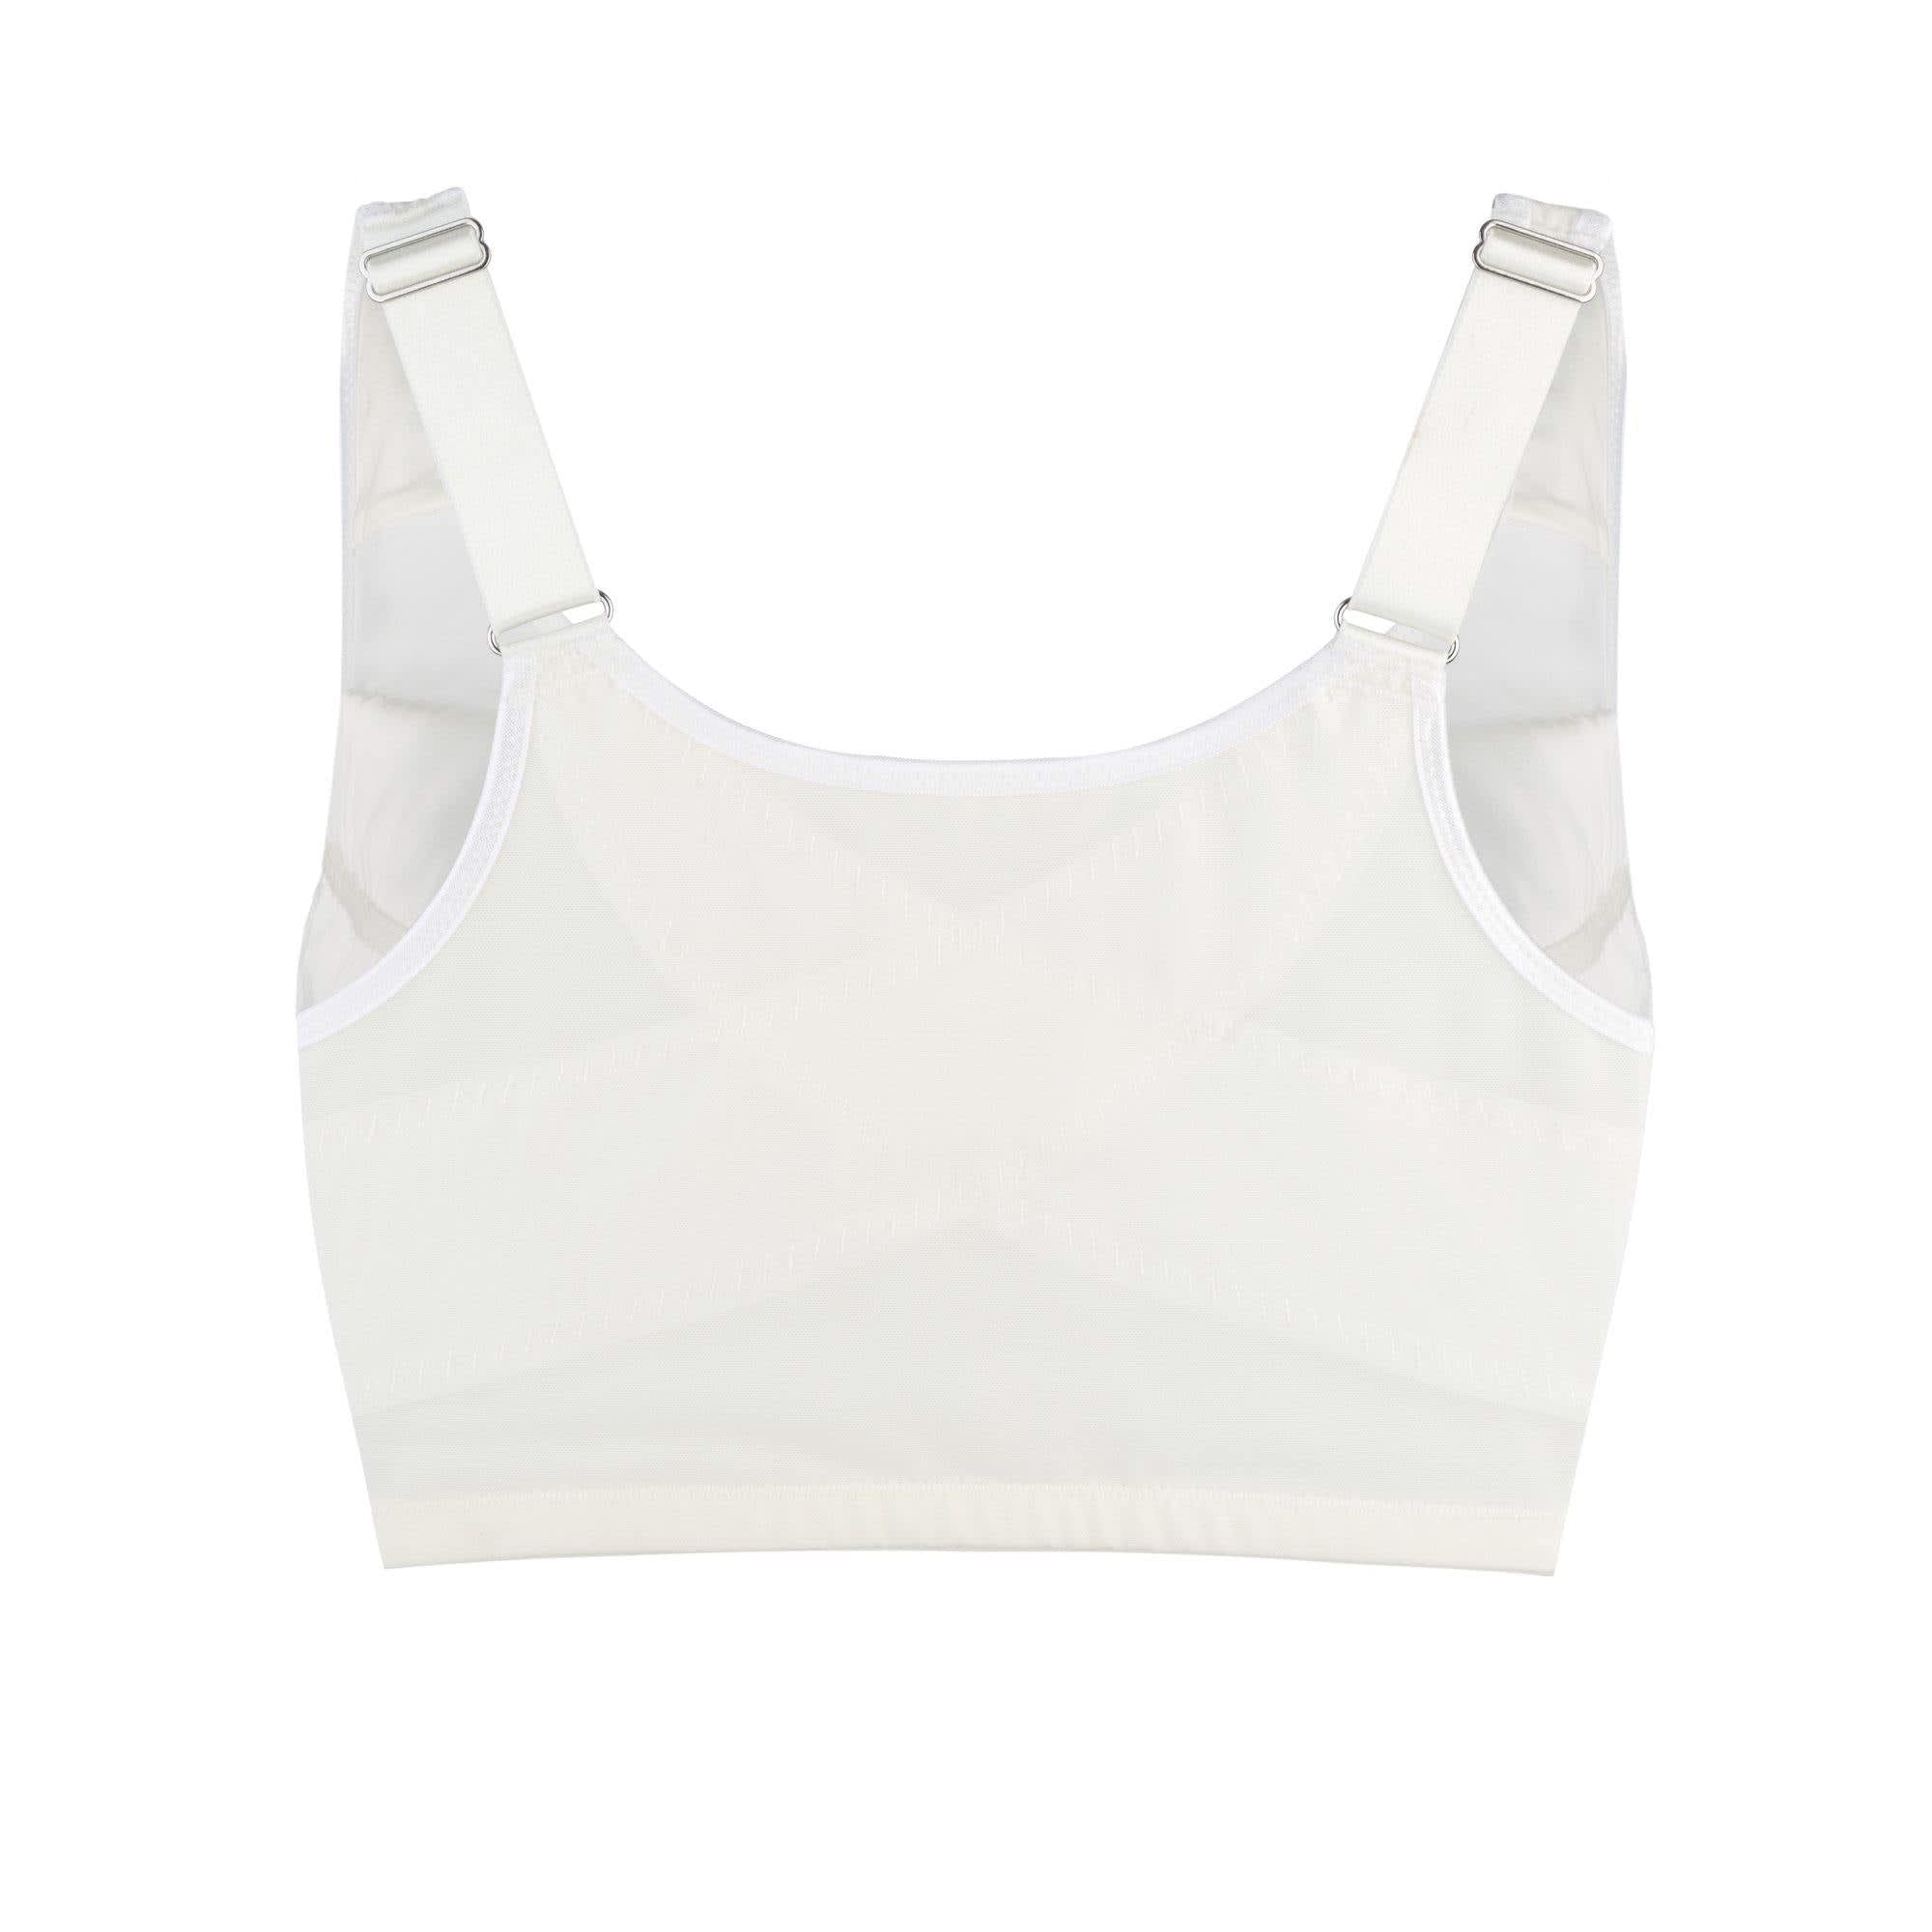 Juliemay Lingerie Claret Silk Back Support Cotton Sports Bra in White